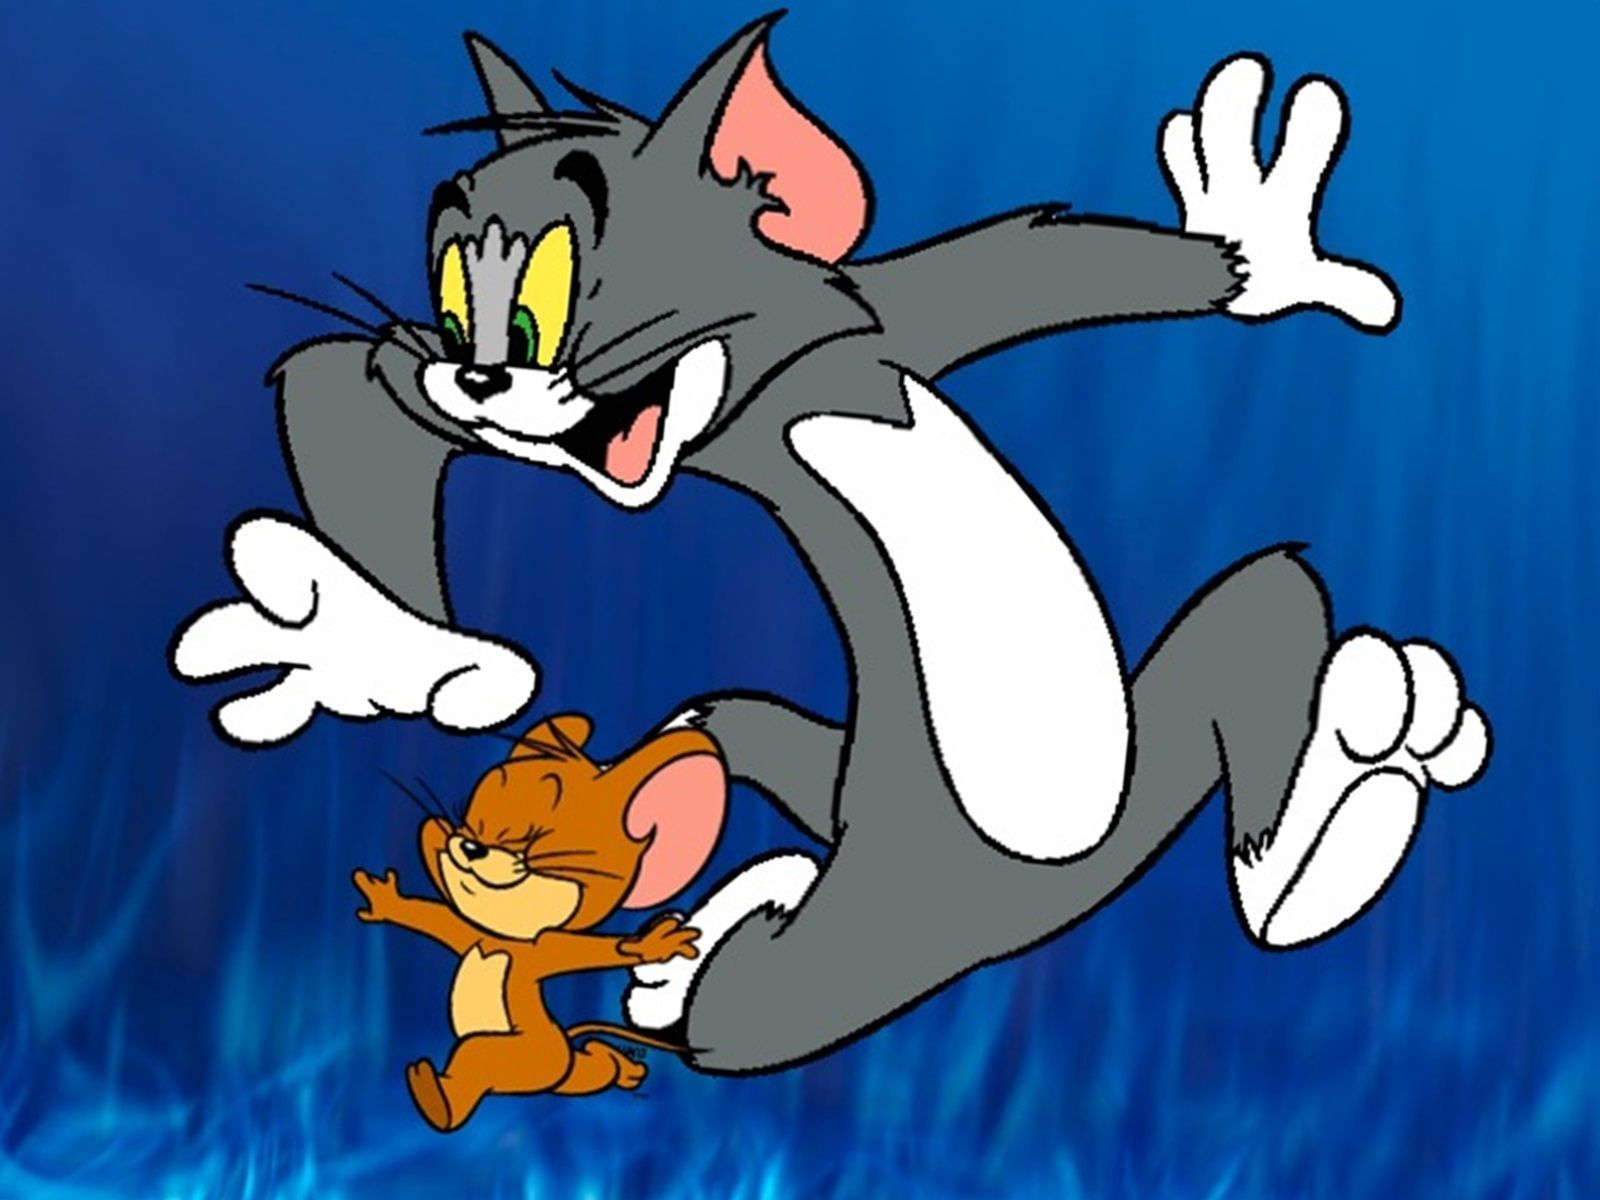 Tom and jerry tales all episodes download in hindi